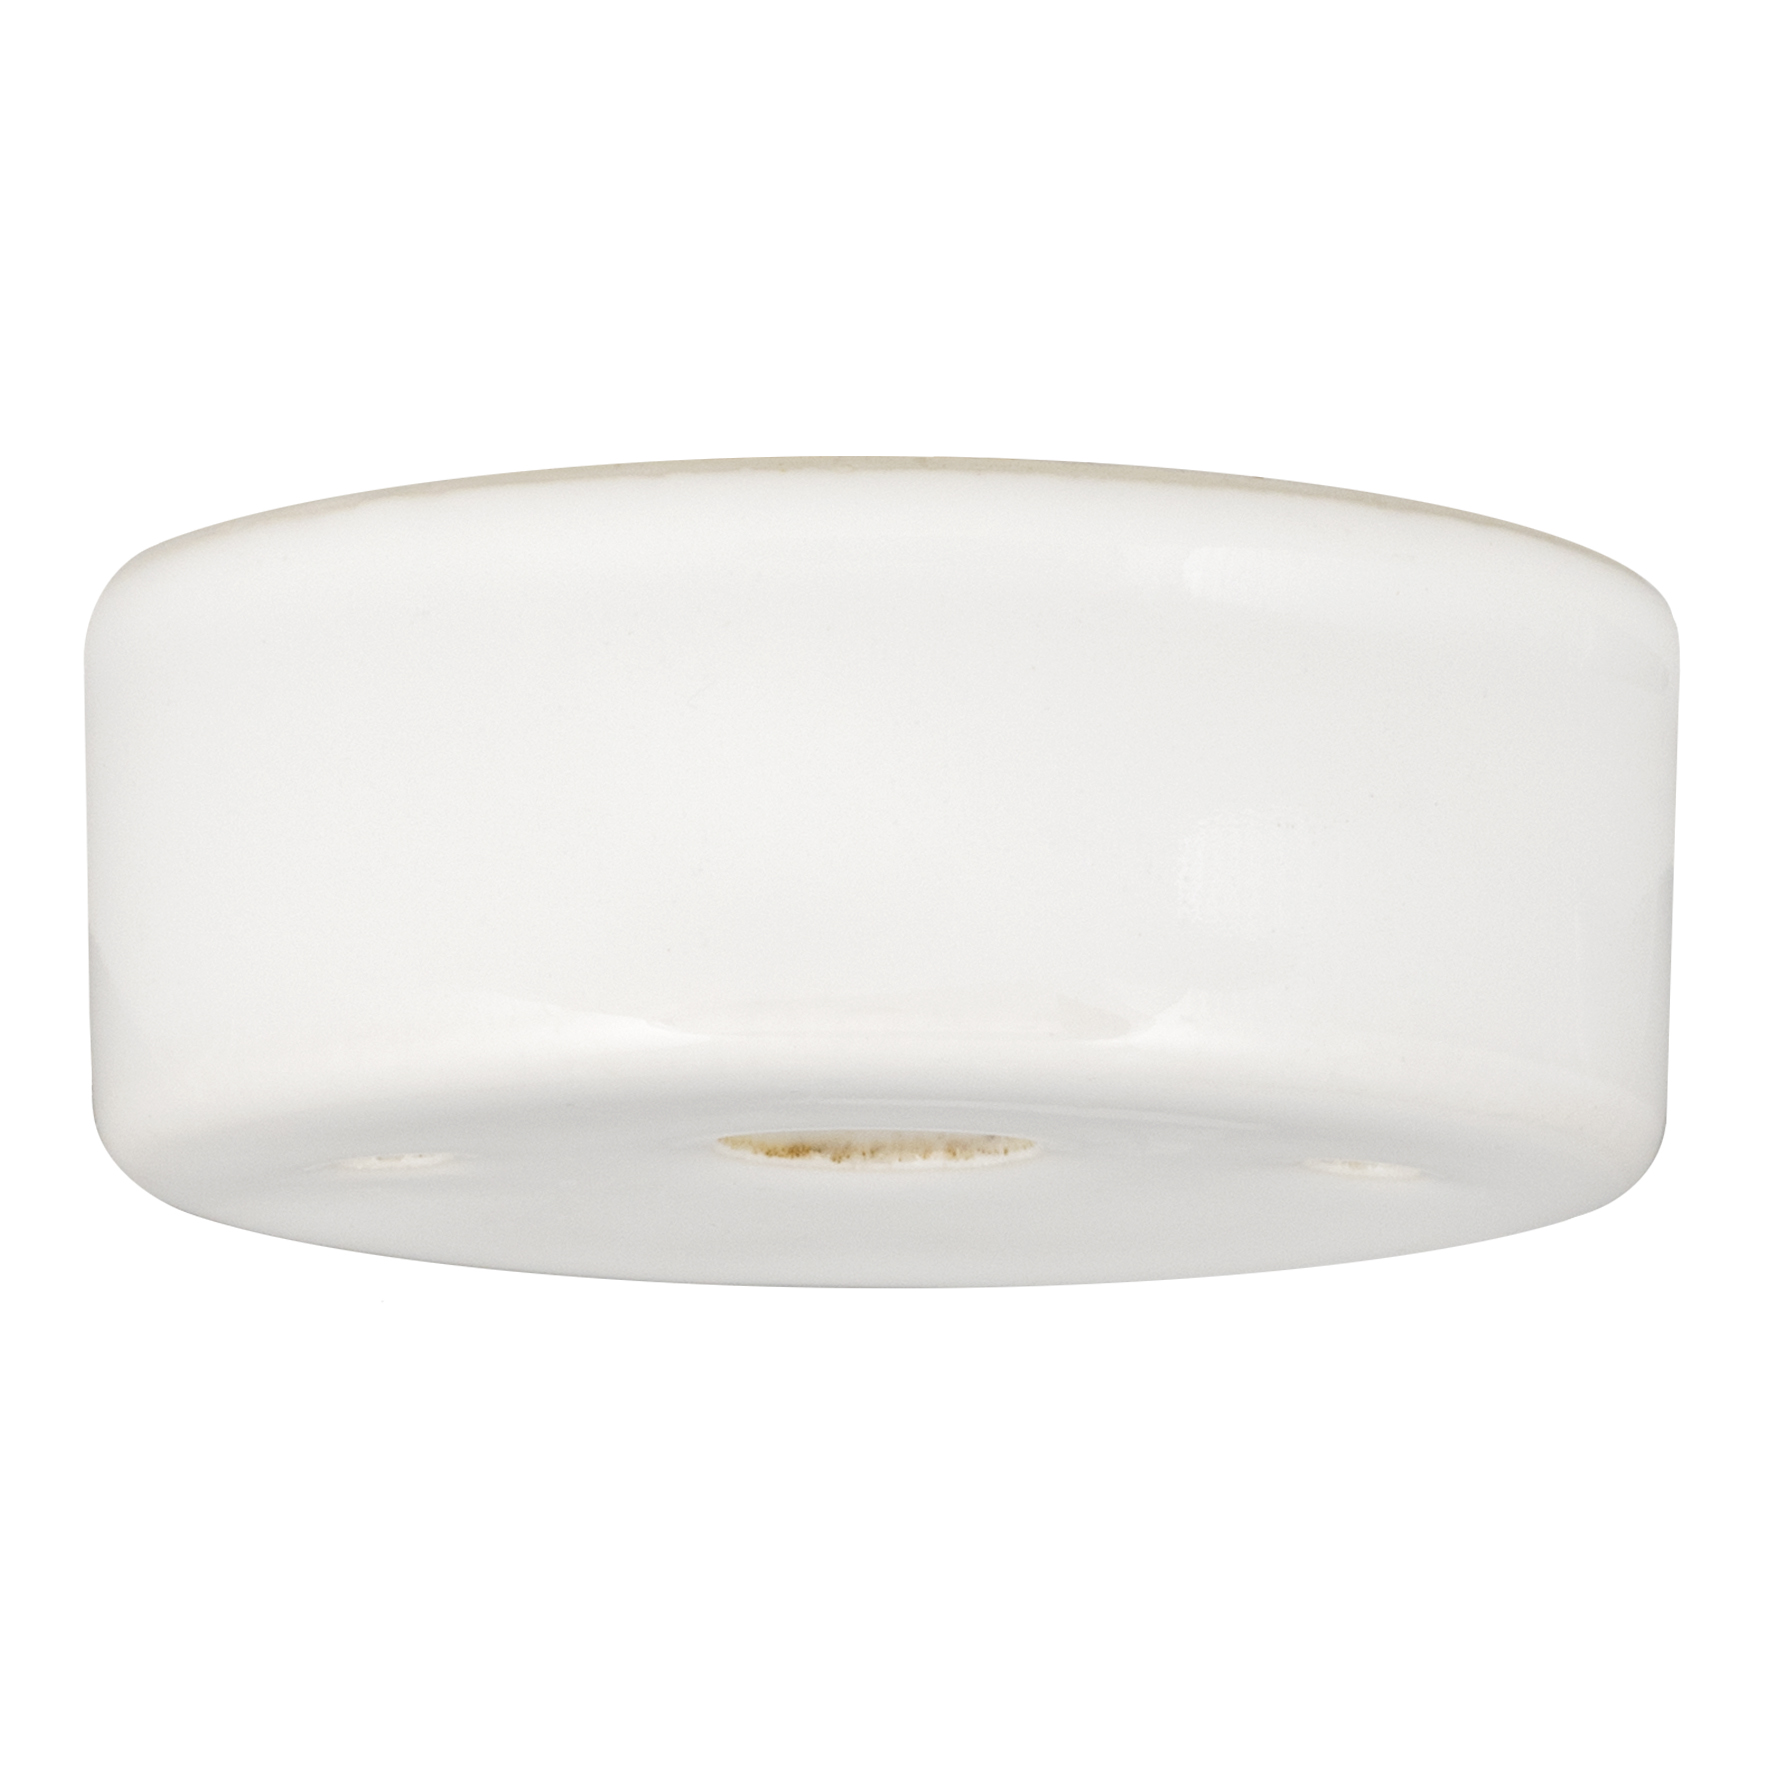 Ceiling Cup Porcelain White Multi-Cord 1-5